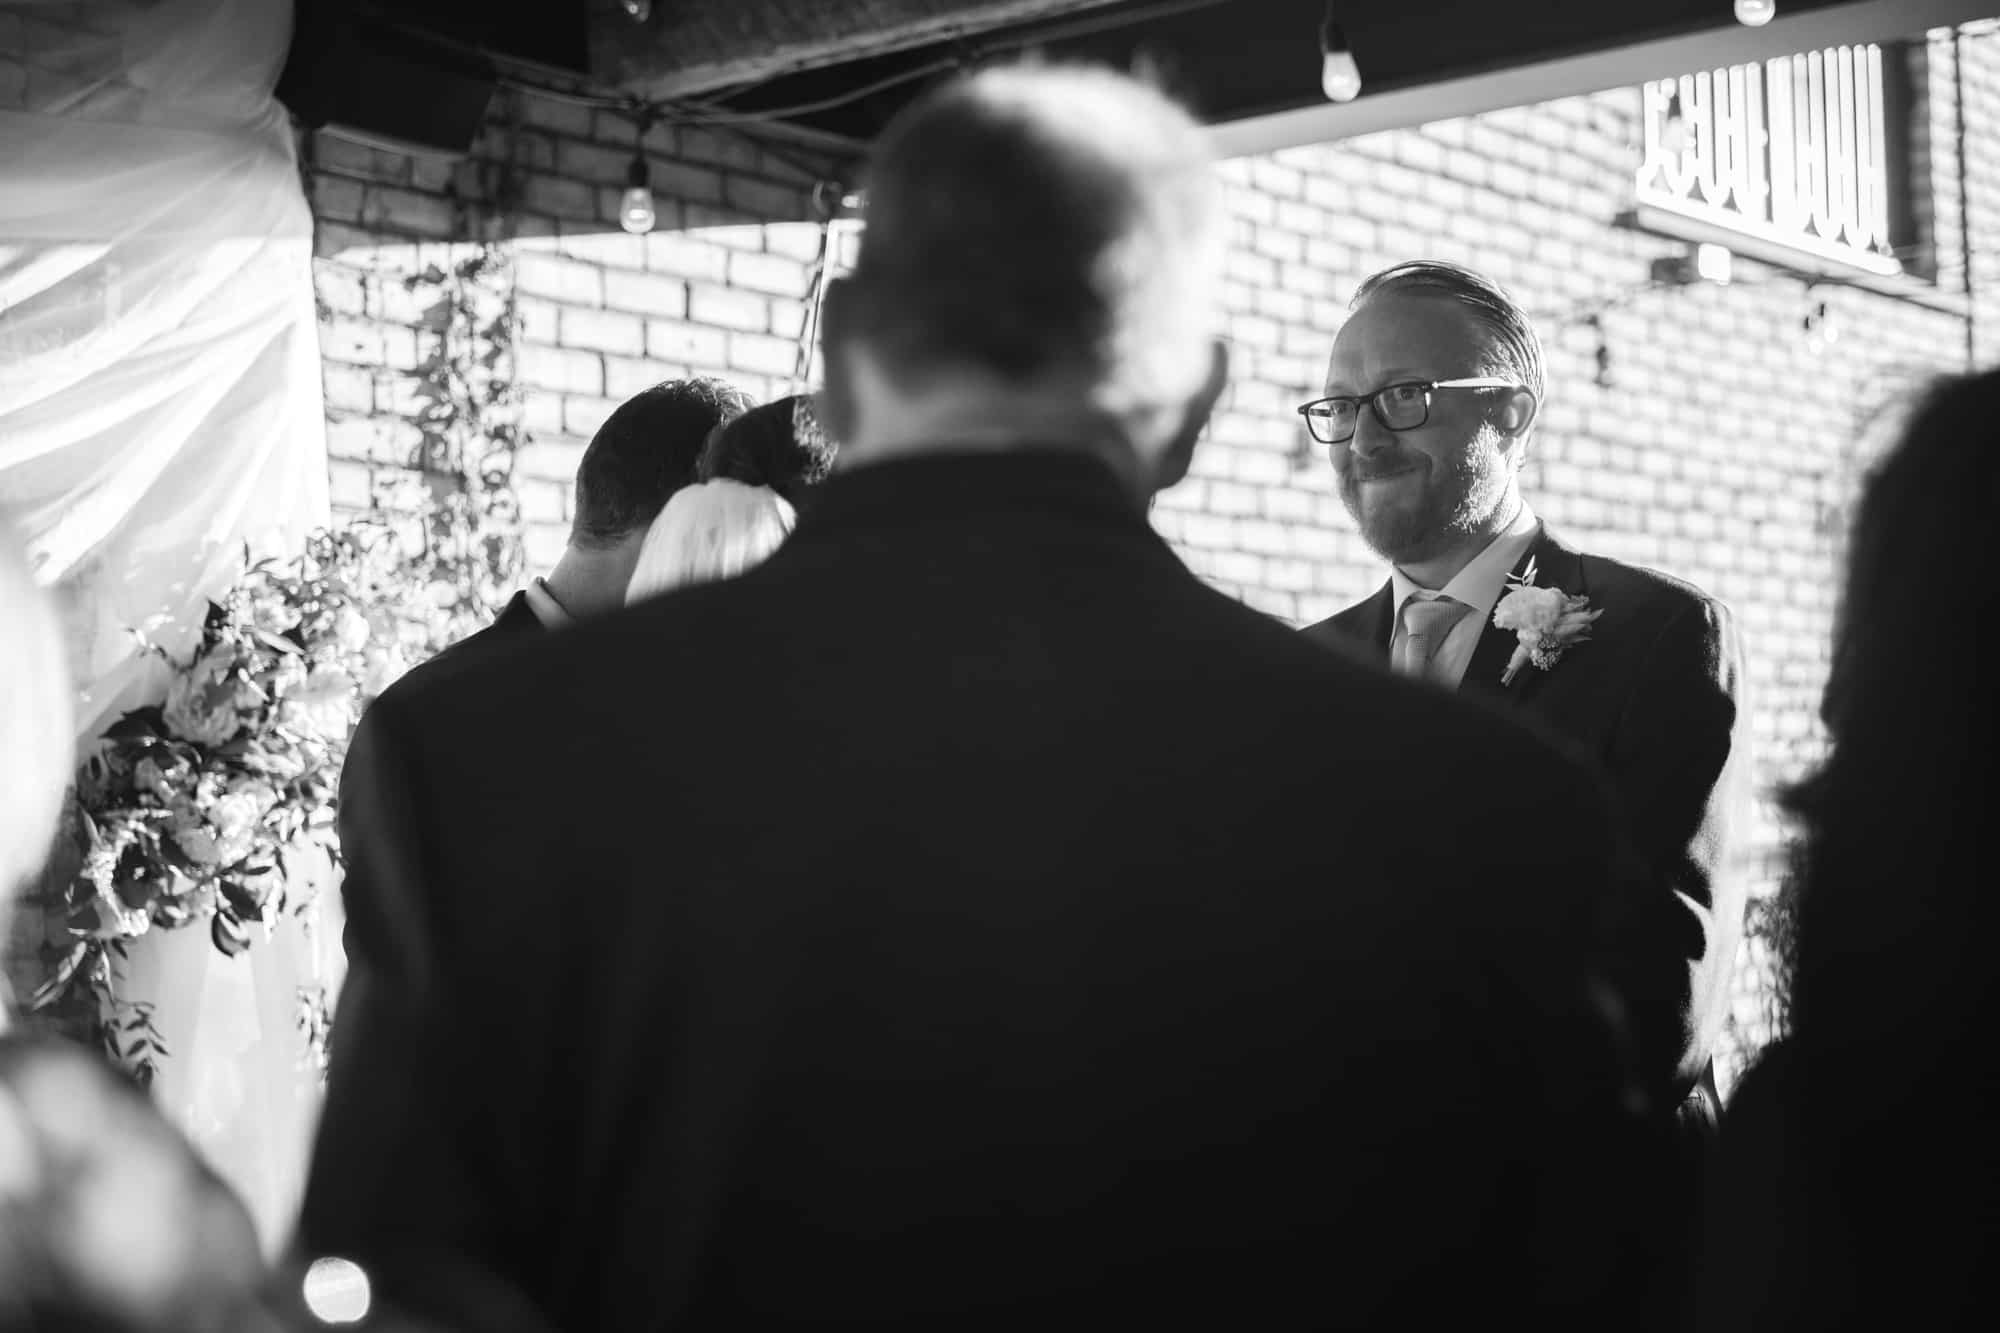 bride and groom, black and white wedding photographer, black and white wedding, wedding ceremony, black and white wedding ceremony, denver wedding photographer